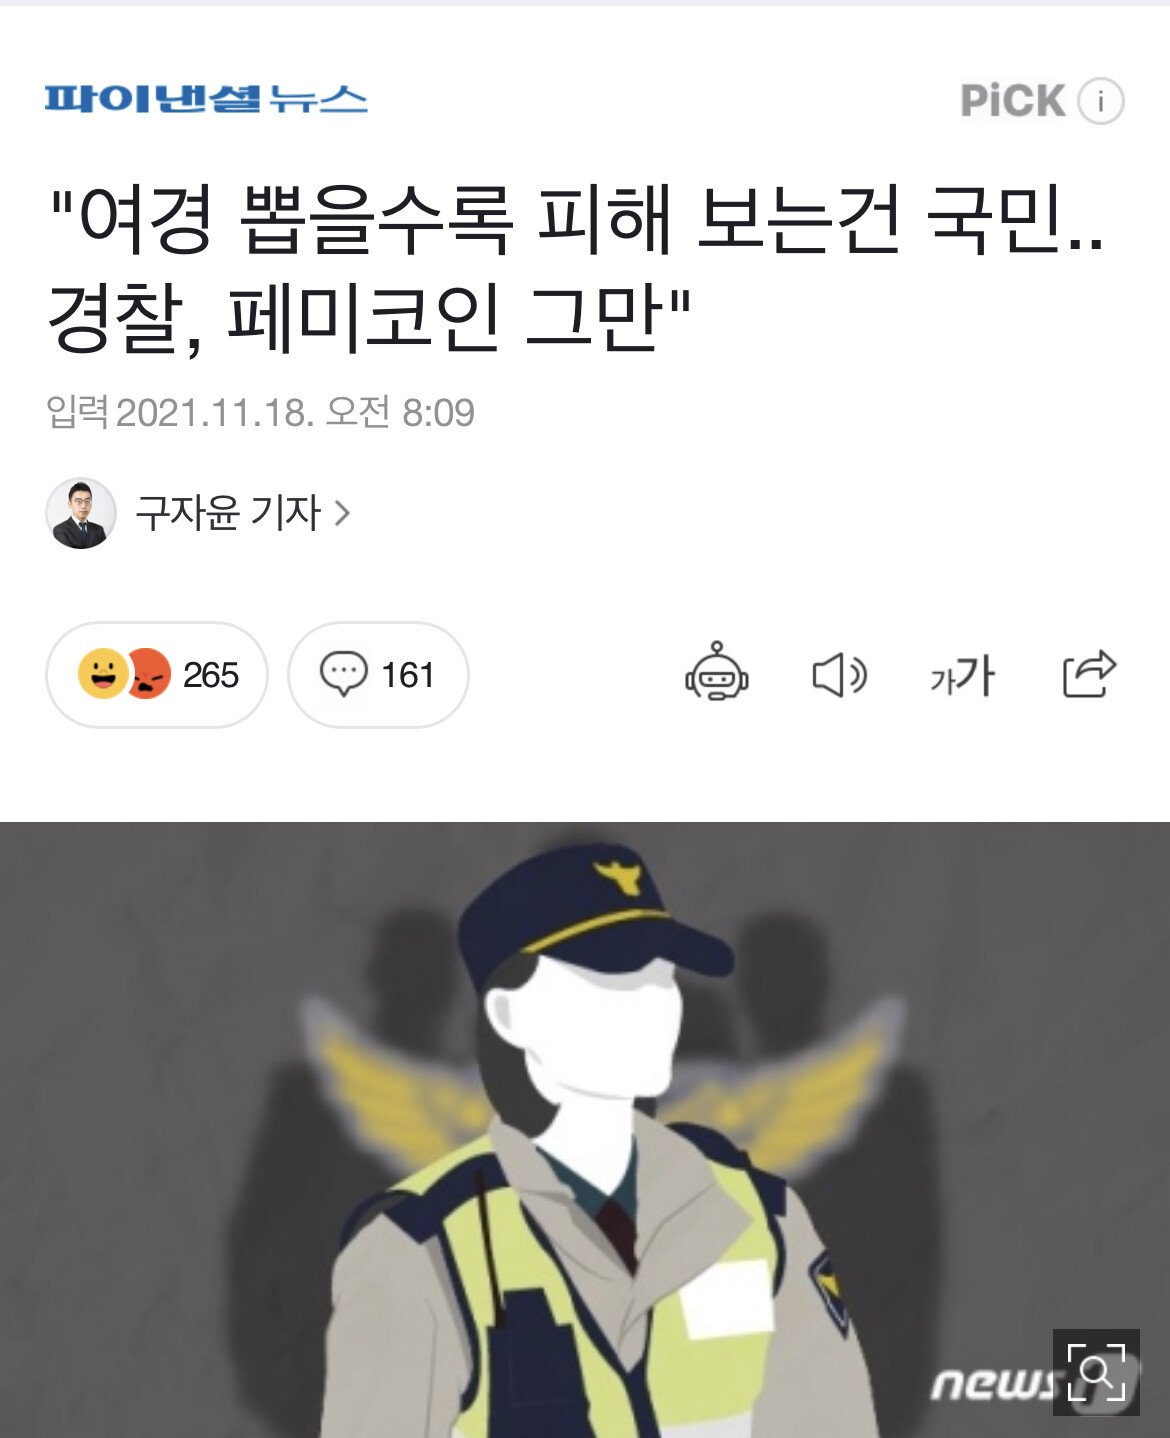 I've never seen a title like this in Naver News history.